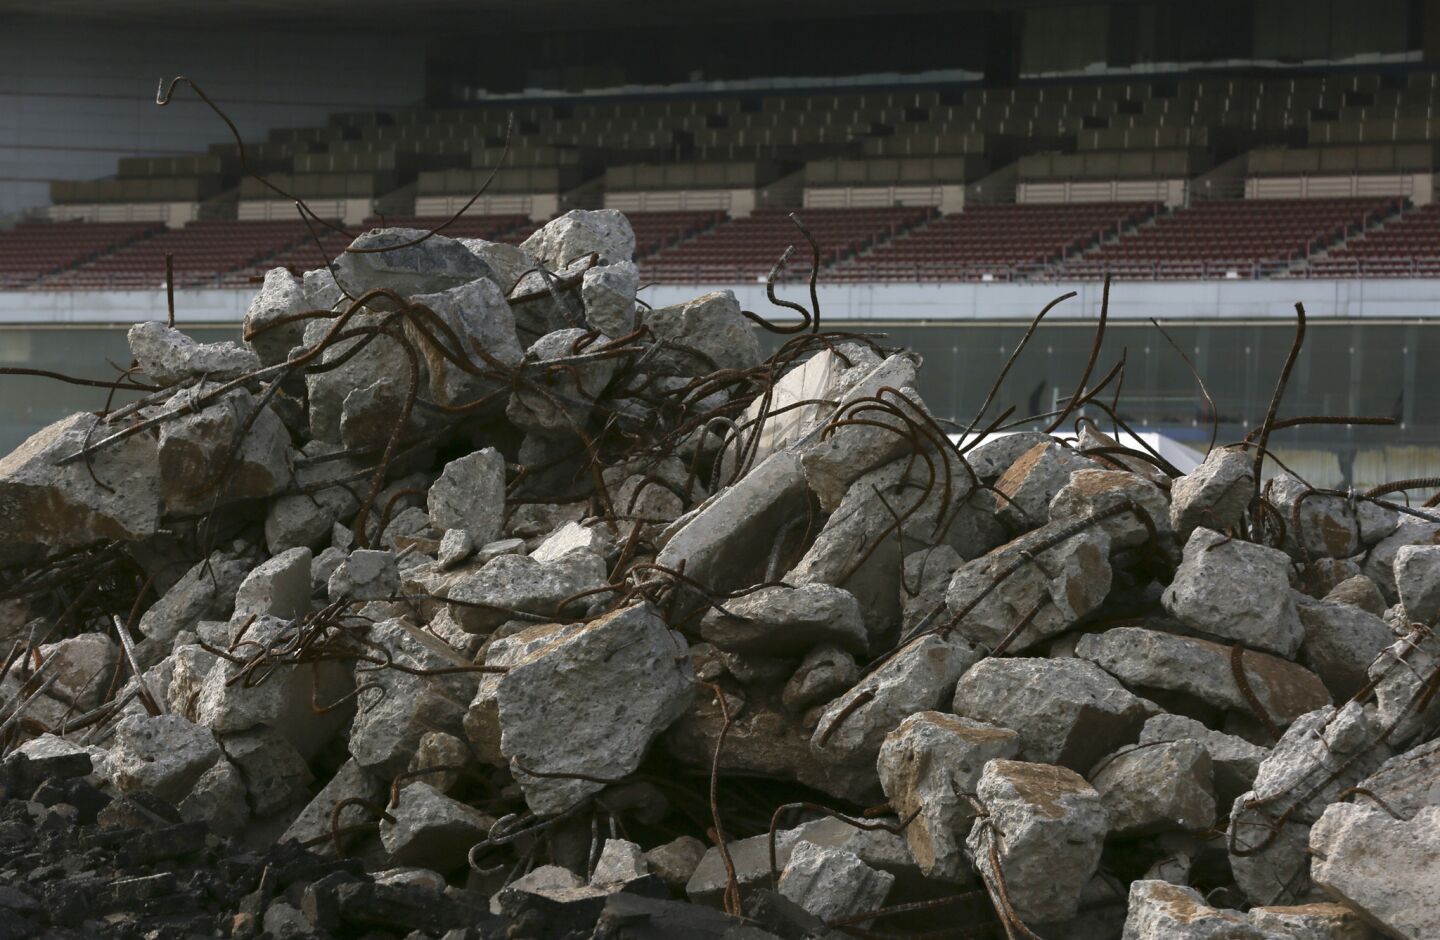 Piles of broken concrete from the old grandstands await the crusher at the future home of the Rams at the old Hollywood Park racetrack in Inglewood on Jan. 13.